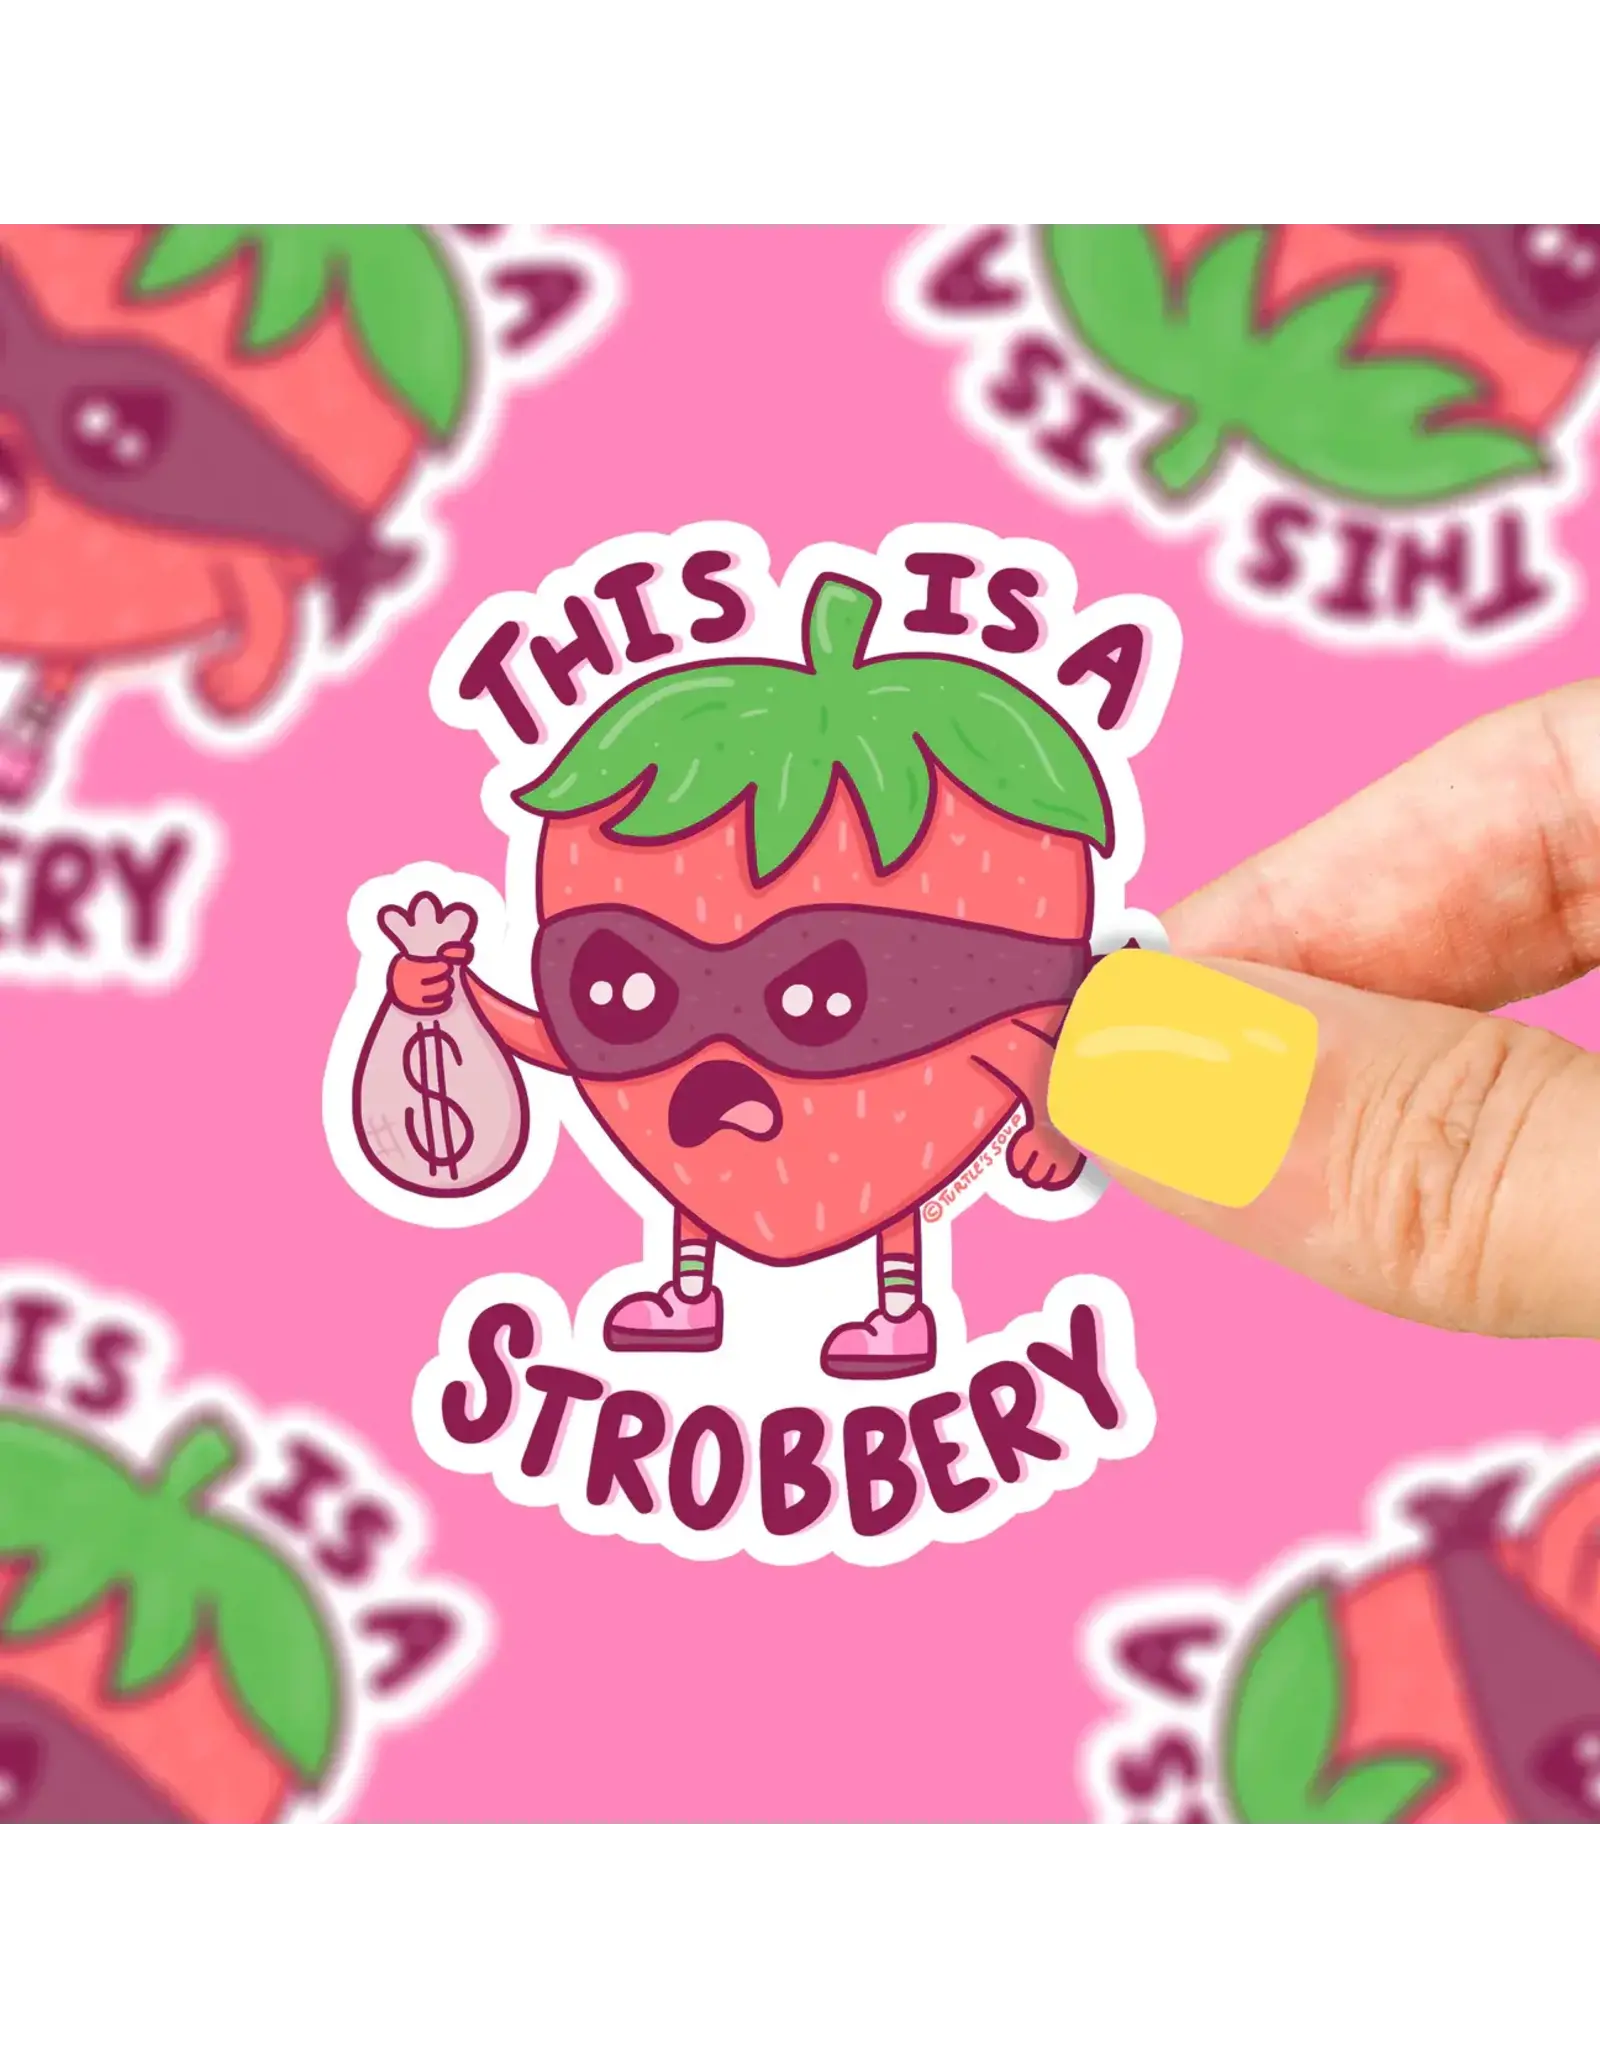 Turtle's Soup This Is A Strobbery Vinyl Sticker